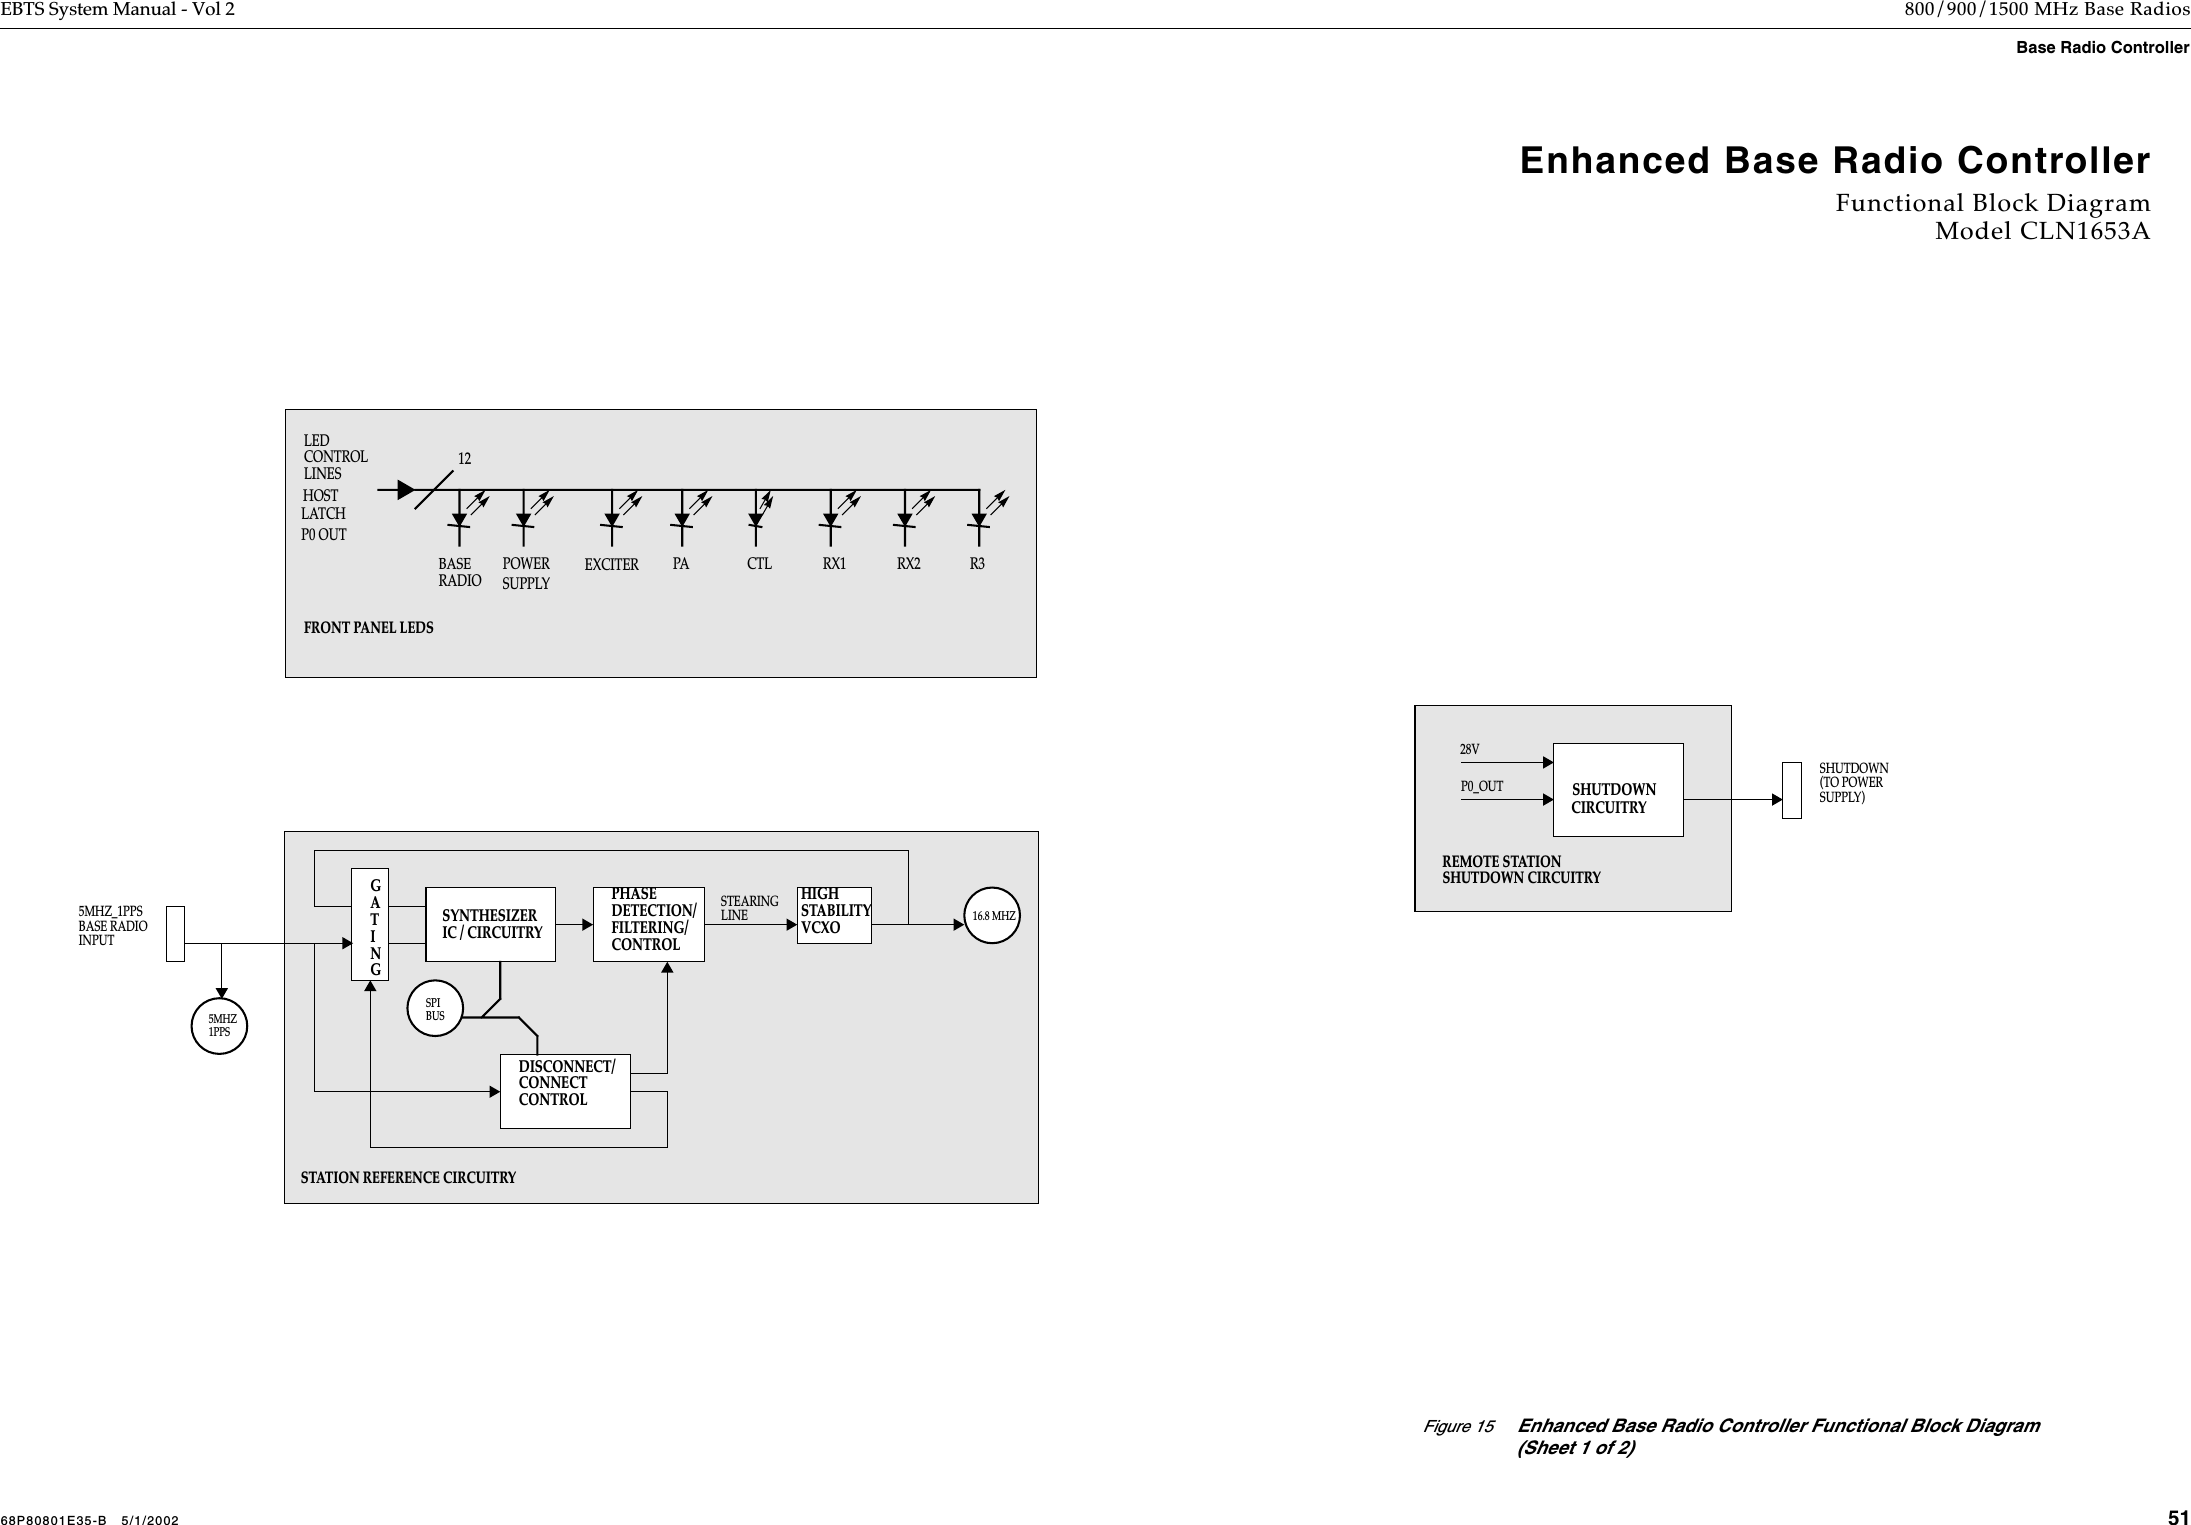  68P80801E35-B   5/1/2002 51 EBTS System Manual - Vol 2 800/900/1500 MHz Base Radios Base Radio Controller  Figure 15 Enhanced Base Radio Controller Functional Block Diagram (Sheet 1 of 2)Enhanced Base Radio ControllerFunctional Block DiagramModel CLN1653ABASERADIO POWER EXCITER PA CTL RX1 RX2 R3P0 OUTLEDCONTROLLINESHOSTLATCH12FRONT PANEL LEDSREMOTE STATION28VP0_OUTSHUTDOWNCIRCUITRYSHUTDOWN(TO POWERSUPPLY)SHUTDOWN CIRCUITRYSYNTHESIZERIC / CIRCUITRY5MHZ_1PPSBASE RADIOINPUTHIGHSTABILITYVCXOPHASEDETECTION/FILTERING/CONTROLSTEARINGLINEDISCONNECT/CONNECTCONTROLGATINGSPIBUS16.8 MHZSTATION REFERENCE CIRCUITRY5MHZ1PPSSUPPLY